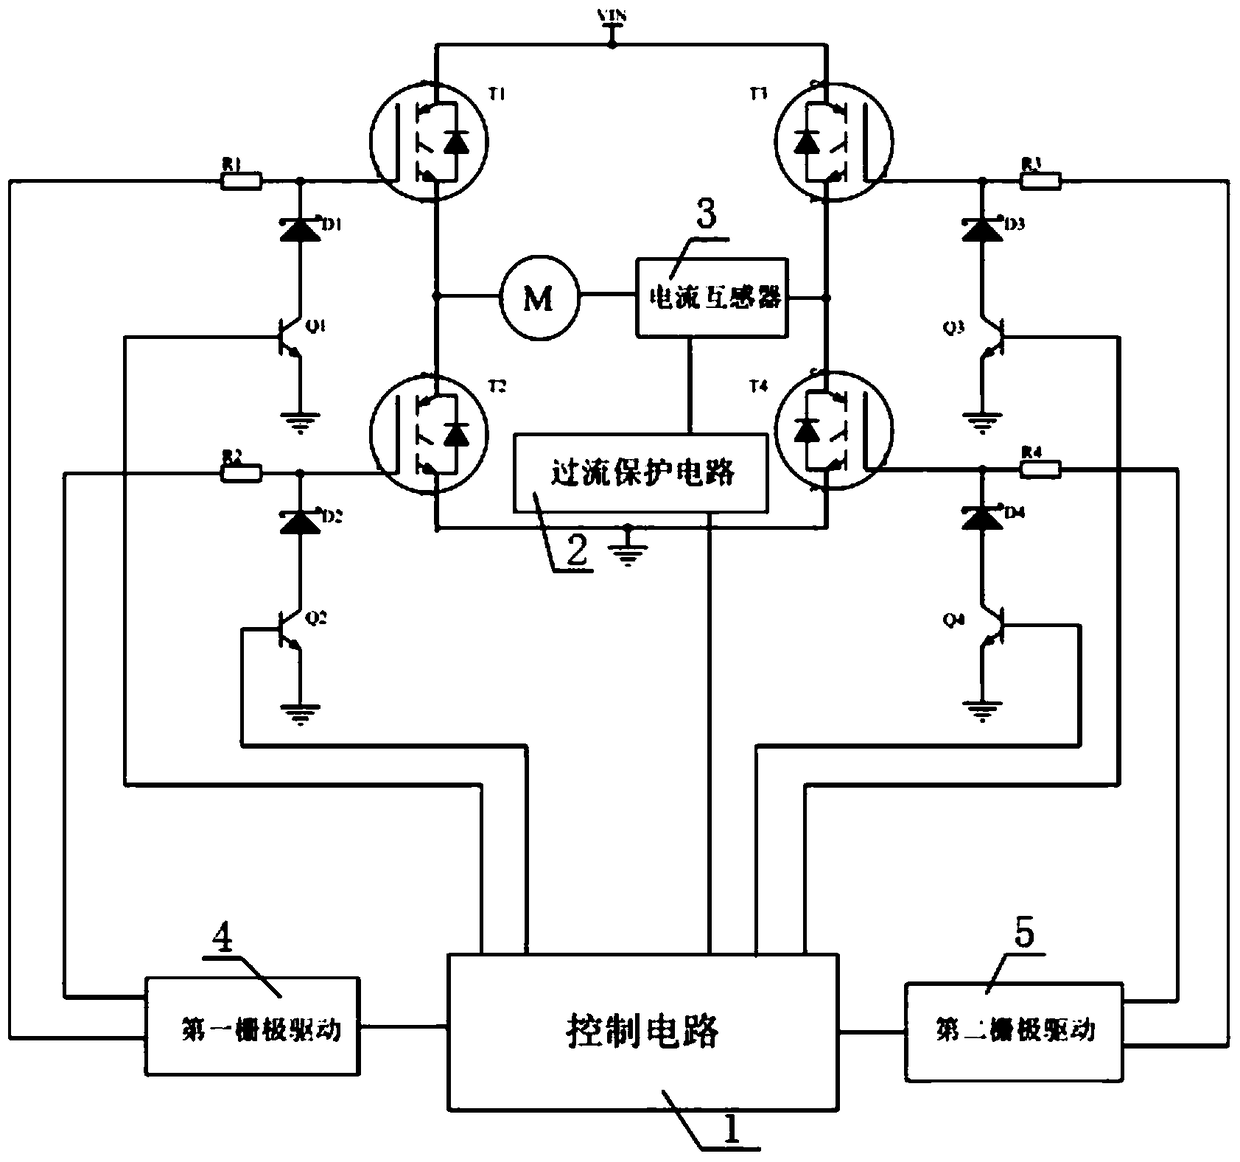 igbt protection circuit and protection method in stepper motor driver